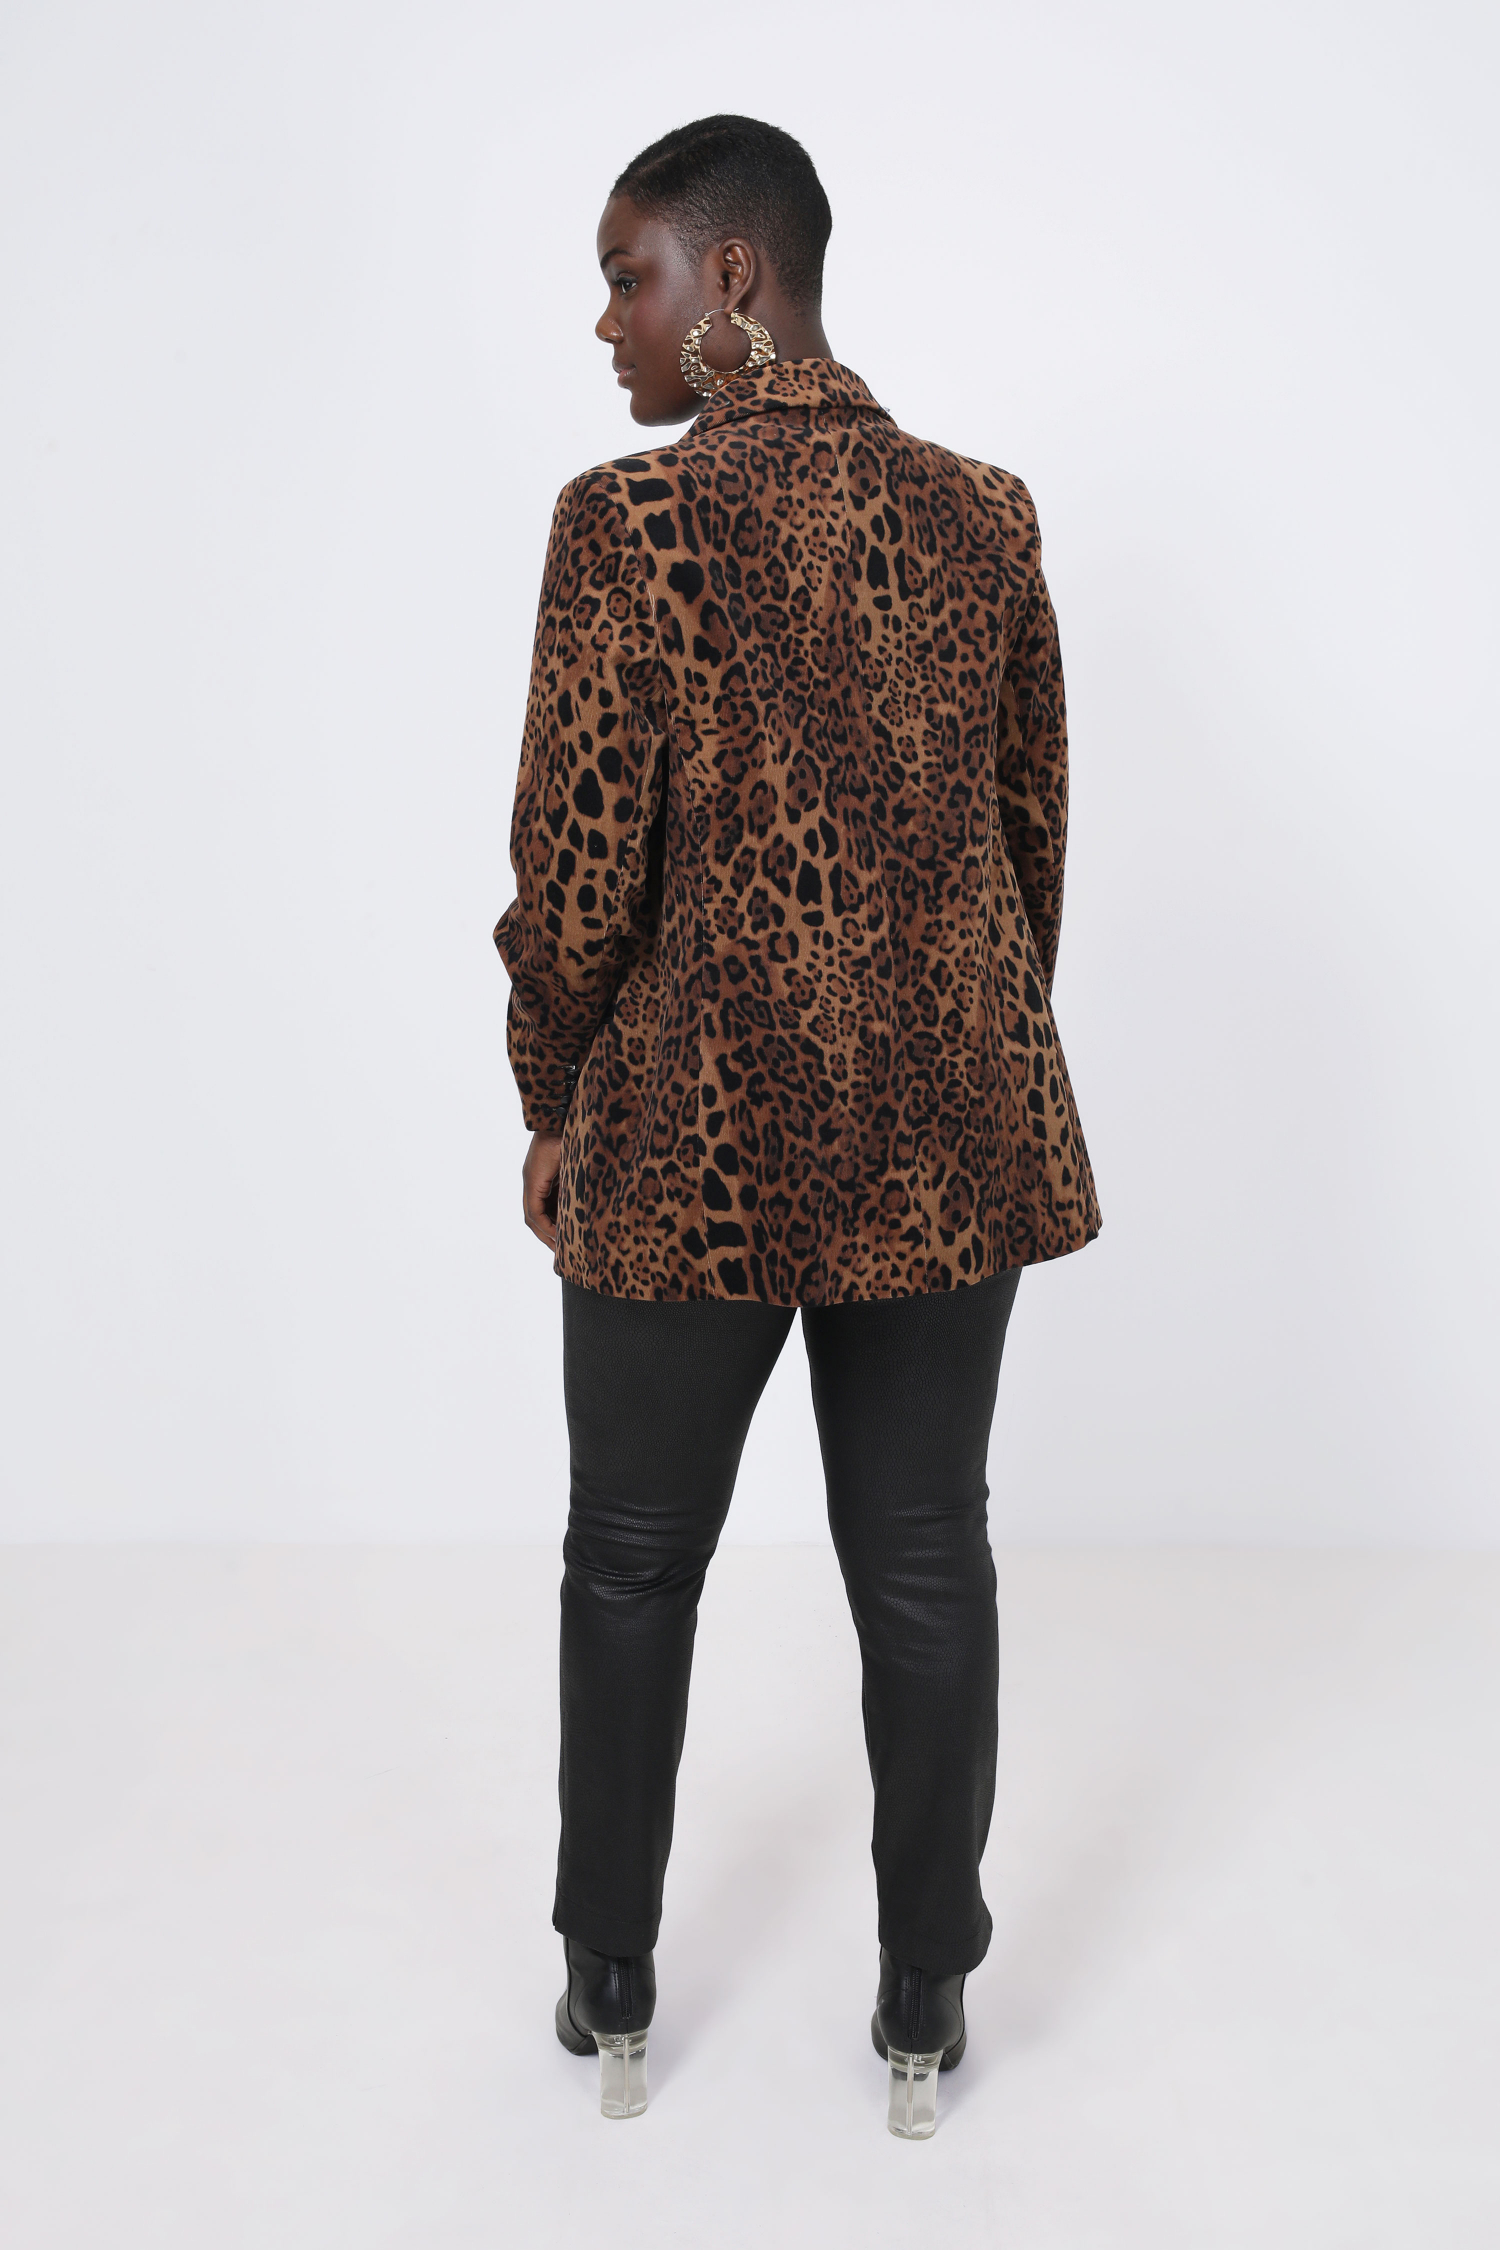 Panther print and faux leather suit jacket